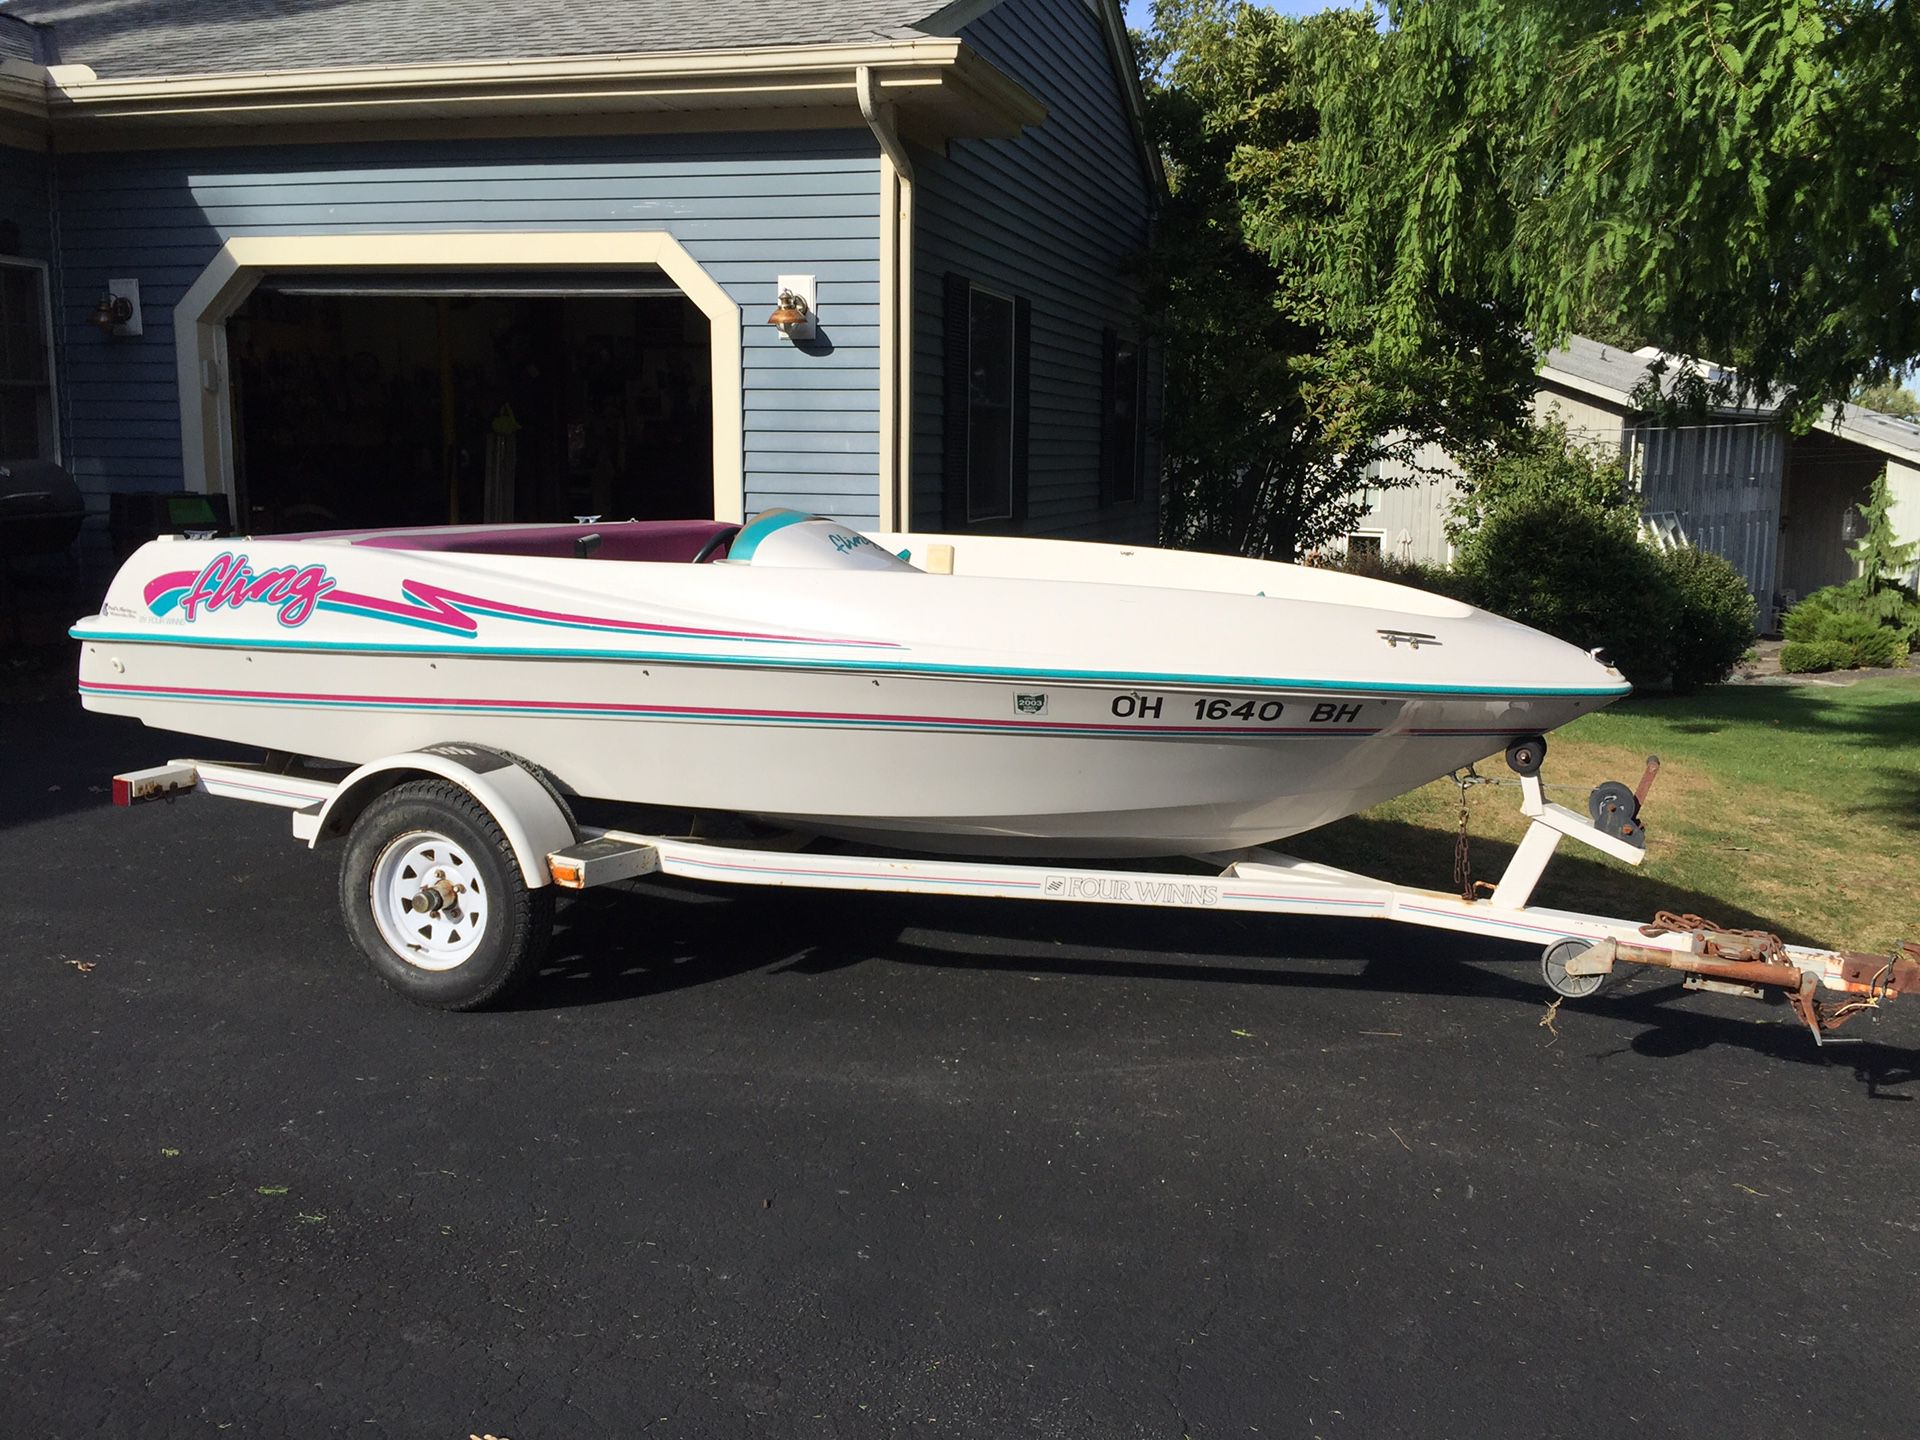 94 four Winn’s fling jet boat as is where is! This will end at 10:00pm tonight!!! Offers after 10:00pm will not be excepted!!